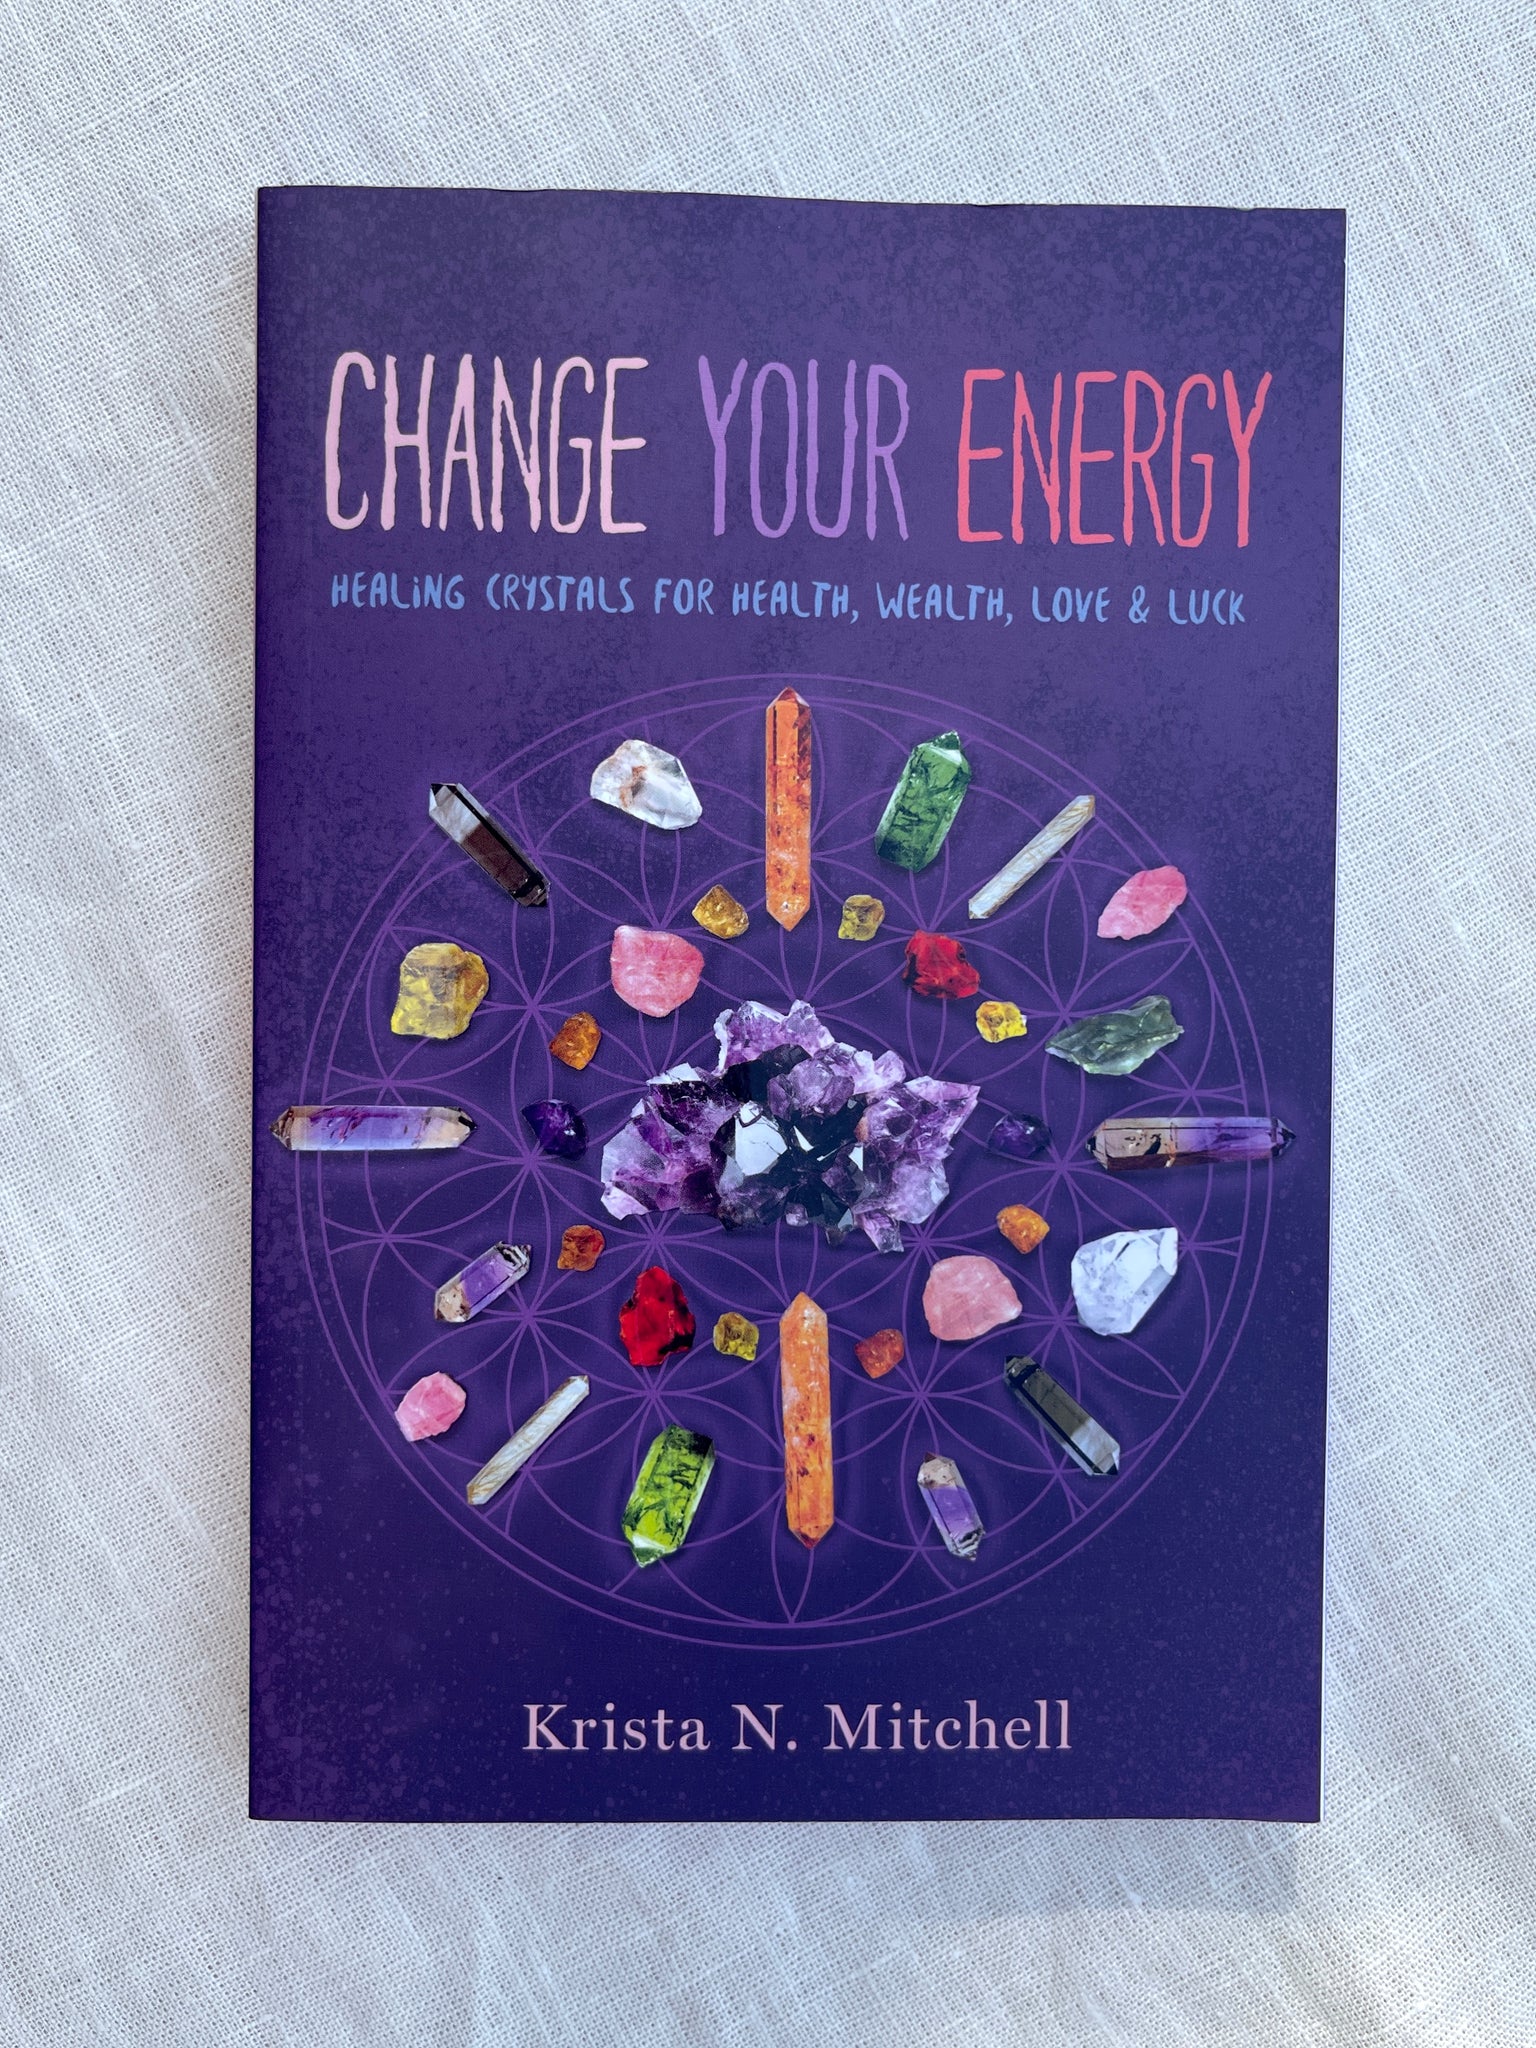 Change Your Energy healing crystals for health, wealth, love and life by krista n. mitchell